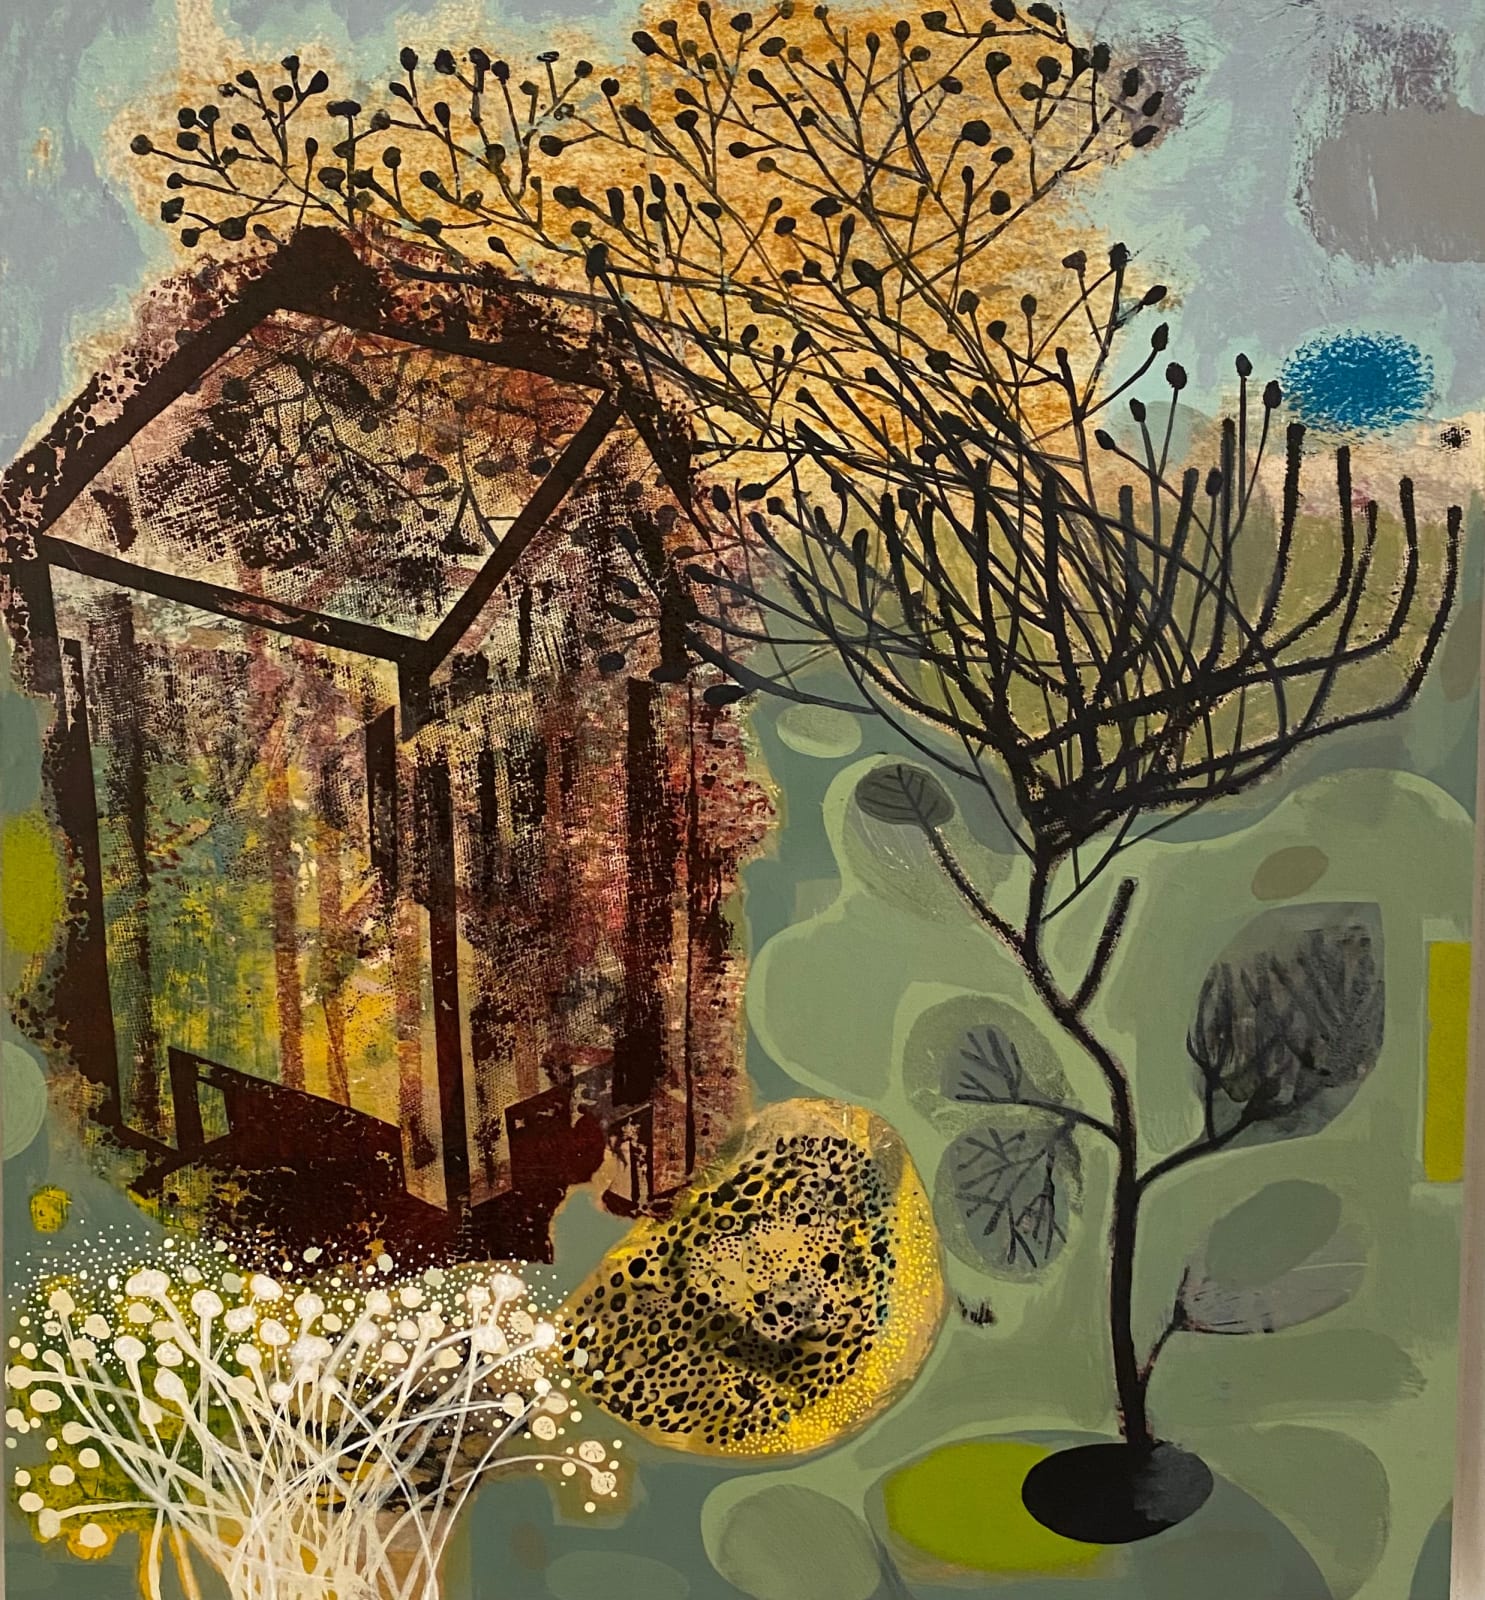 Tom Wood, The Garden and the Shed, 2022